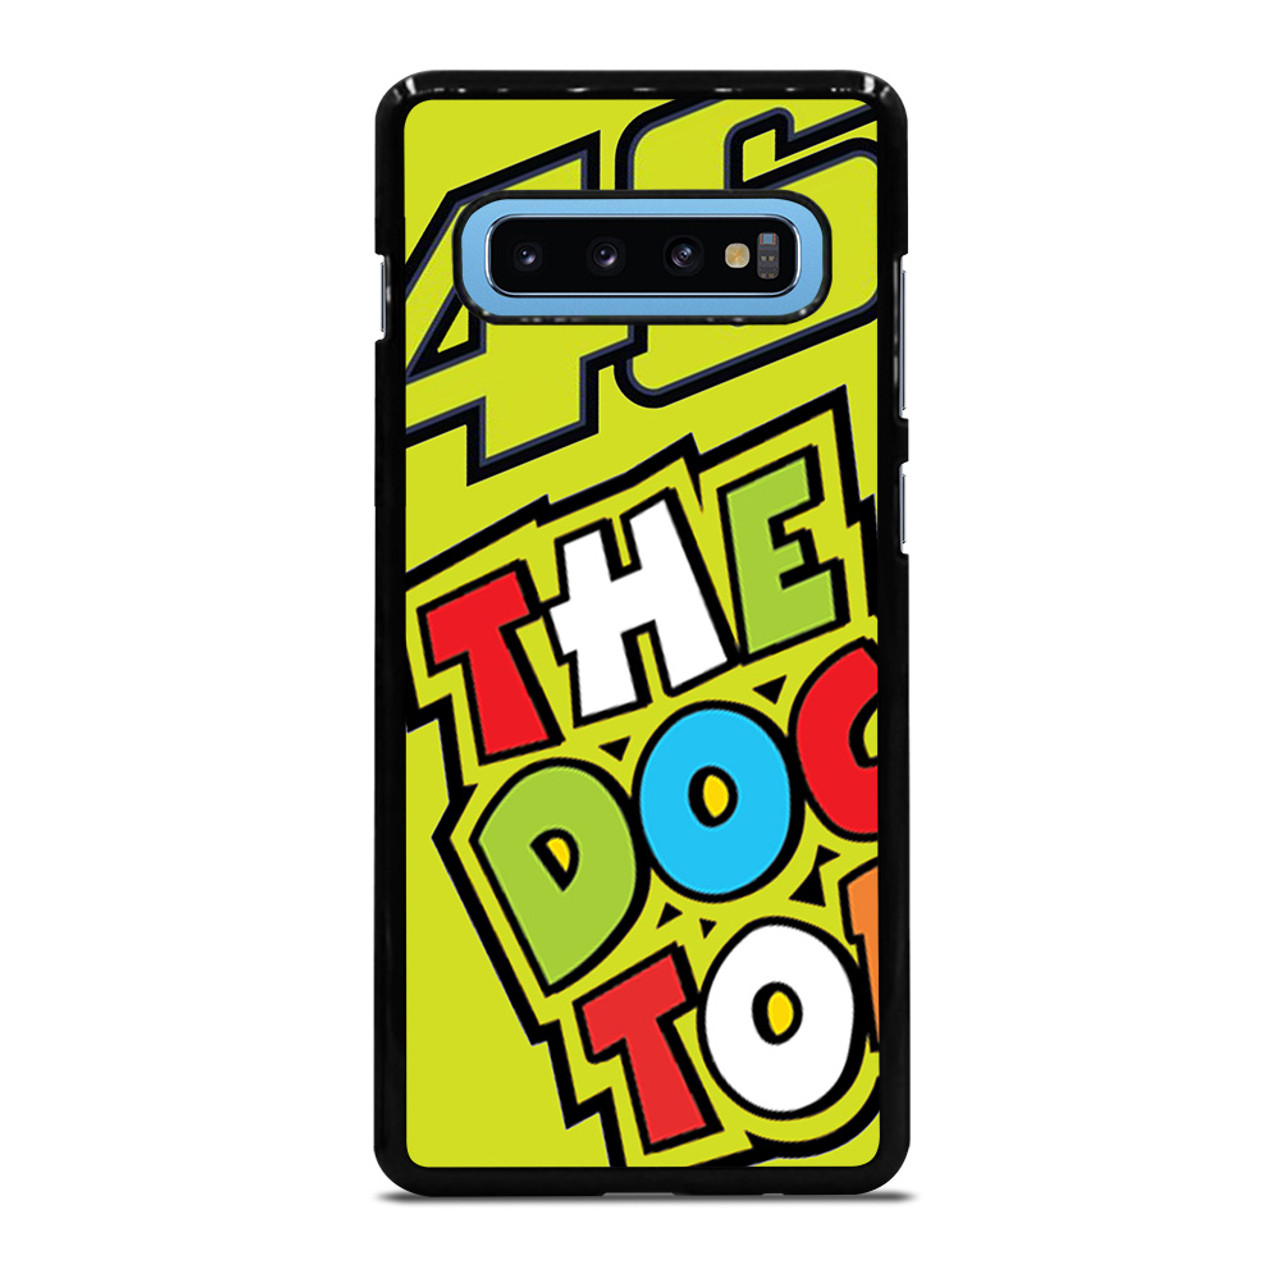 selvbiografi dome Udvidelse VALENTINO ROSSI VR46 THE DOCTOR Samsung Galaxy S10 Plus Case Cover